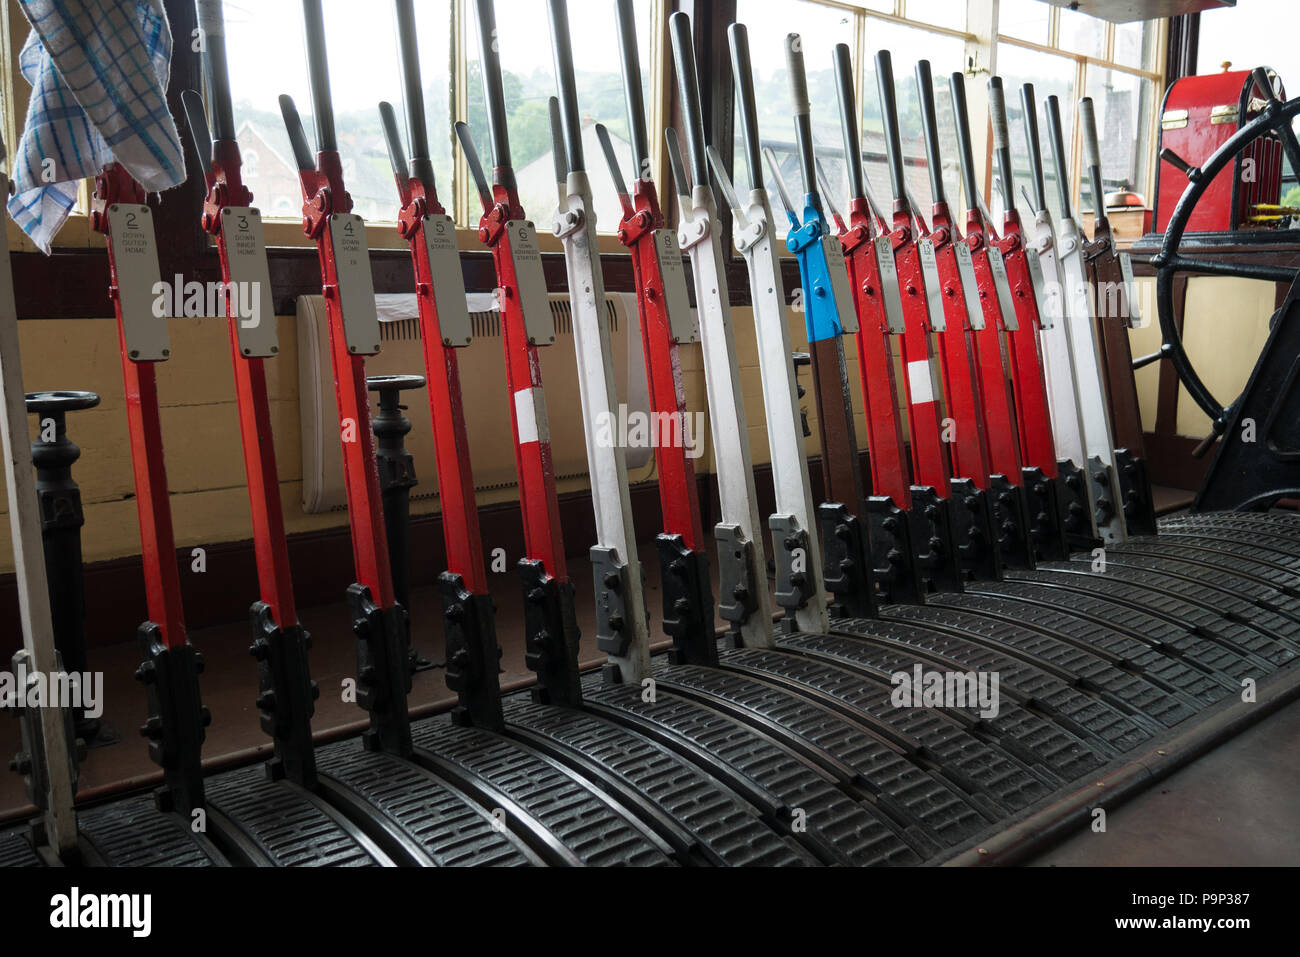 Rail-way signal-box control point with it's colourfull levers. Glyndyfrdwy Station, Wales, UK. June 09 2016 - Stock Photo